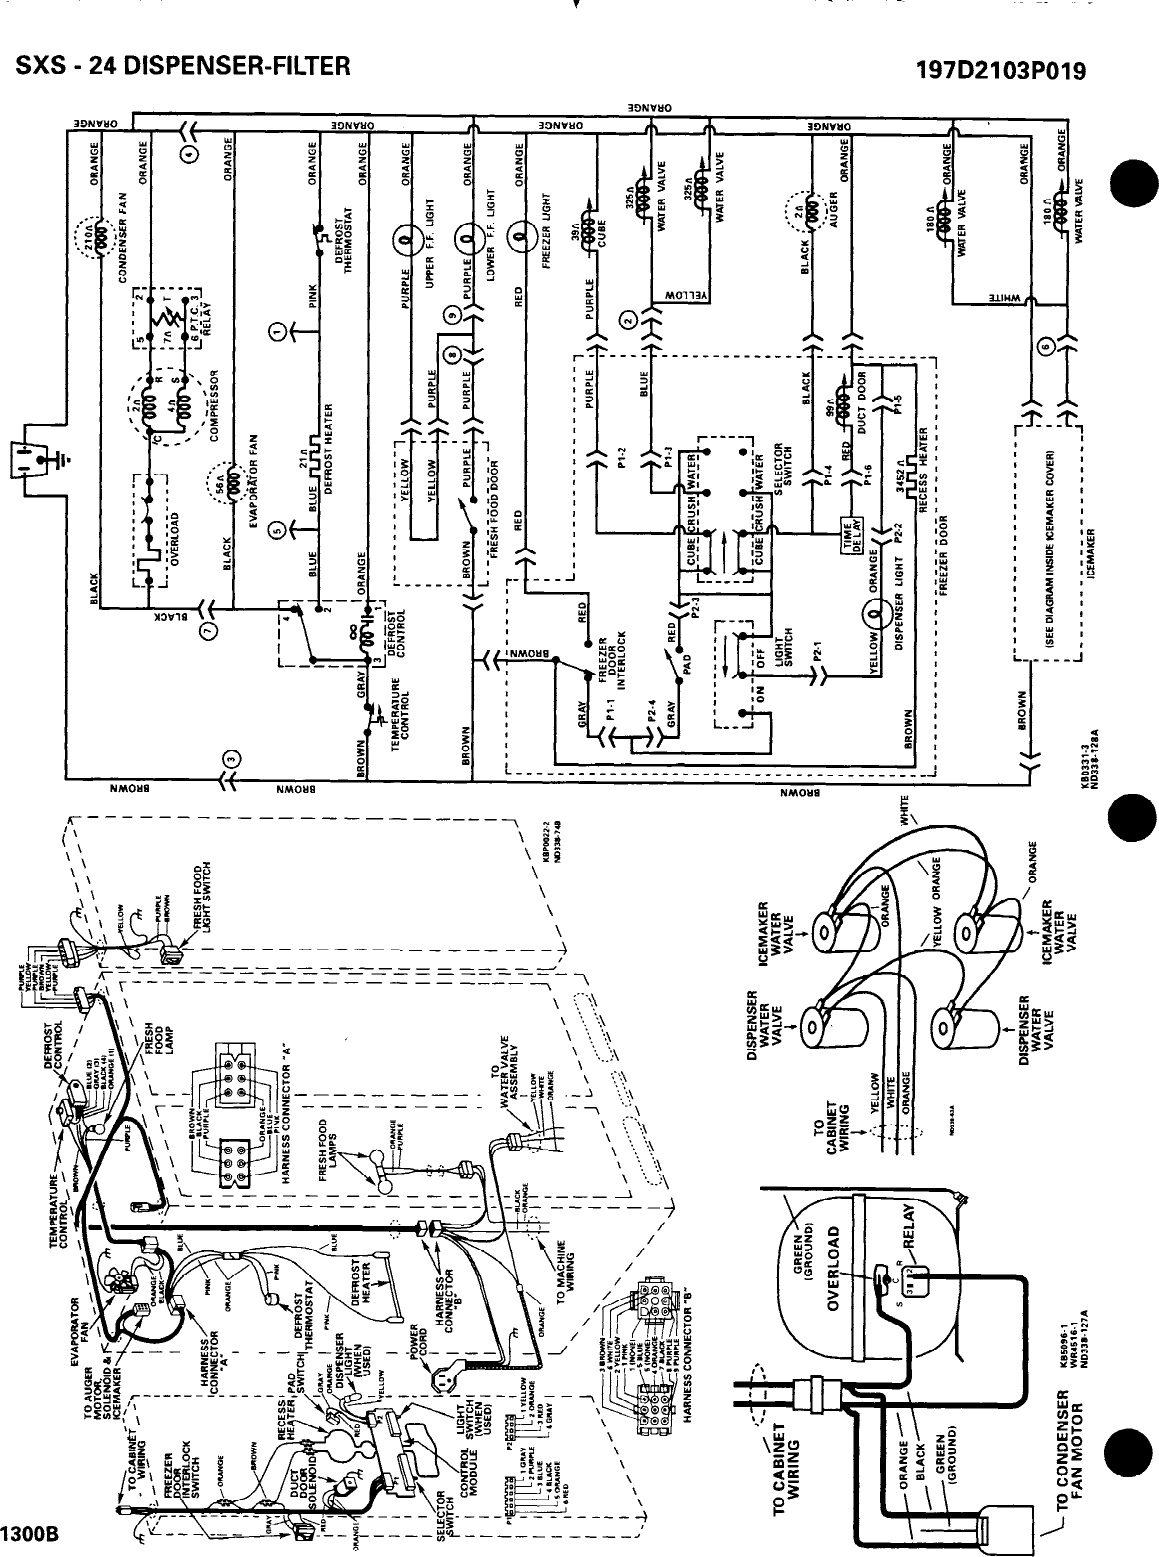 Page 1 of 2 - 31-51300.max  GE Refrig - Tech Sheet 31-51300